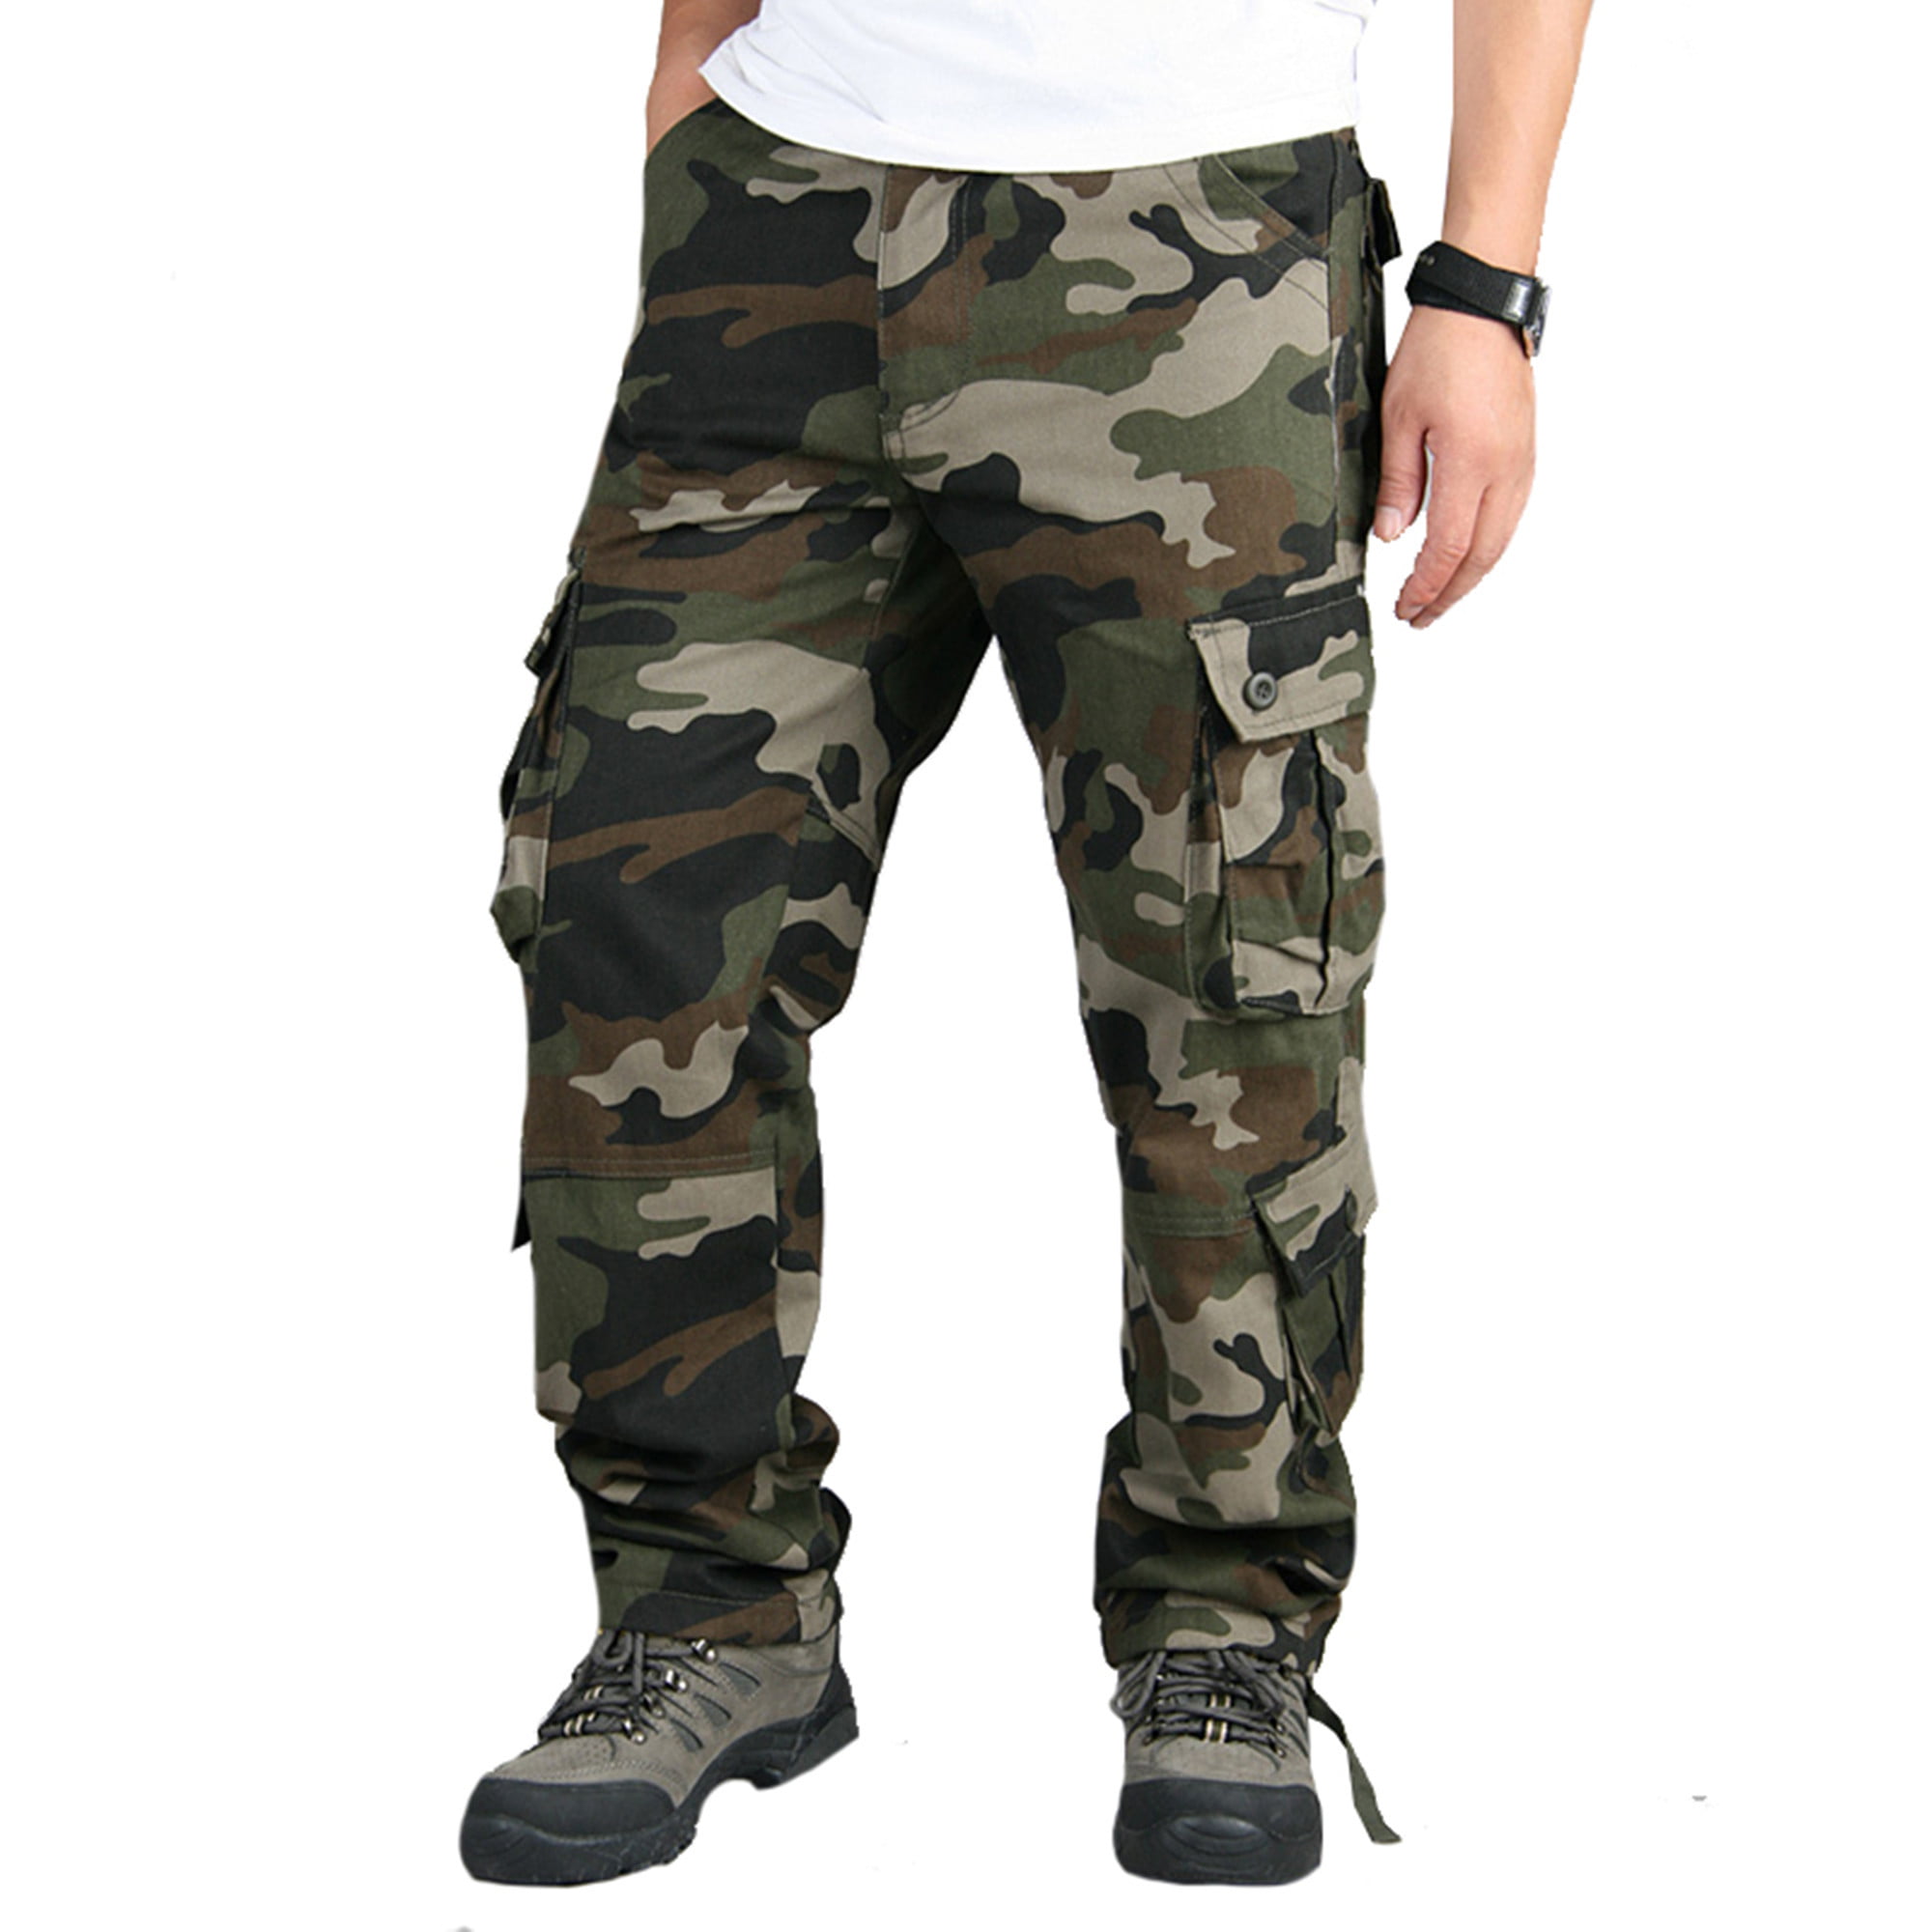 Details about   Military Camo Trousers Hunting Mens Pants Utility Camouflage 32R Elastic Waist 